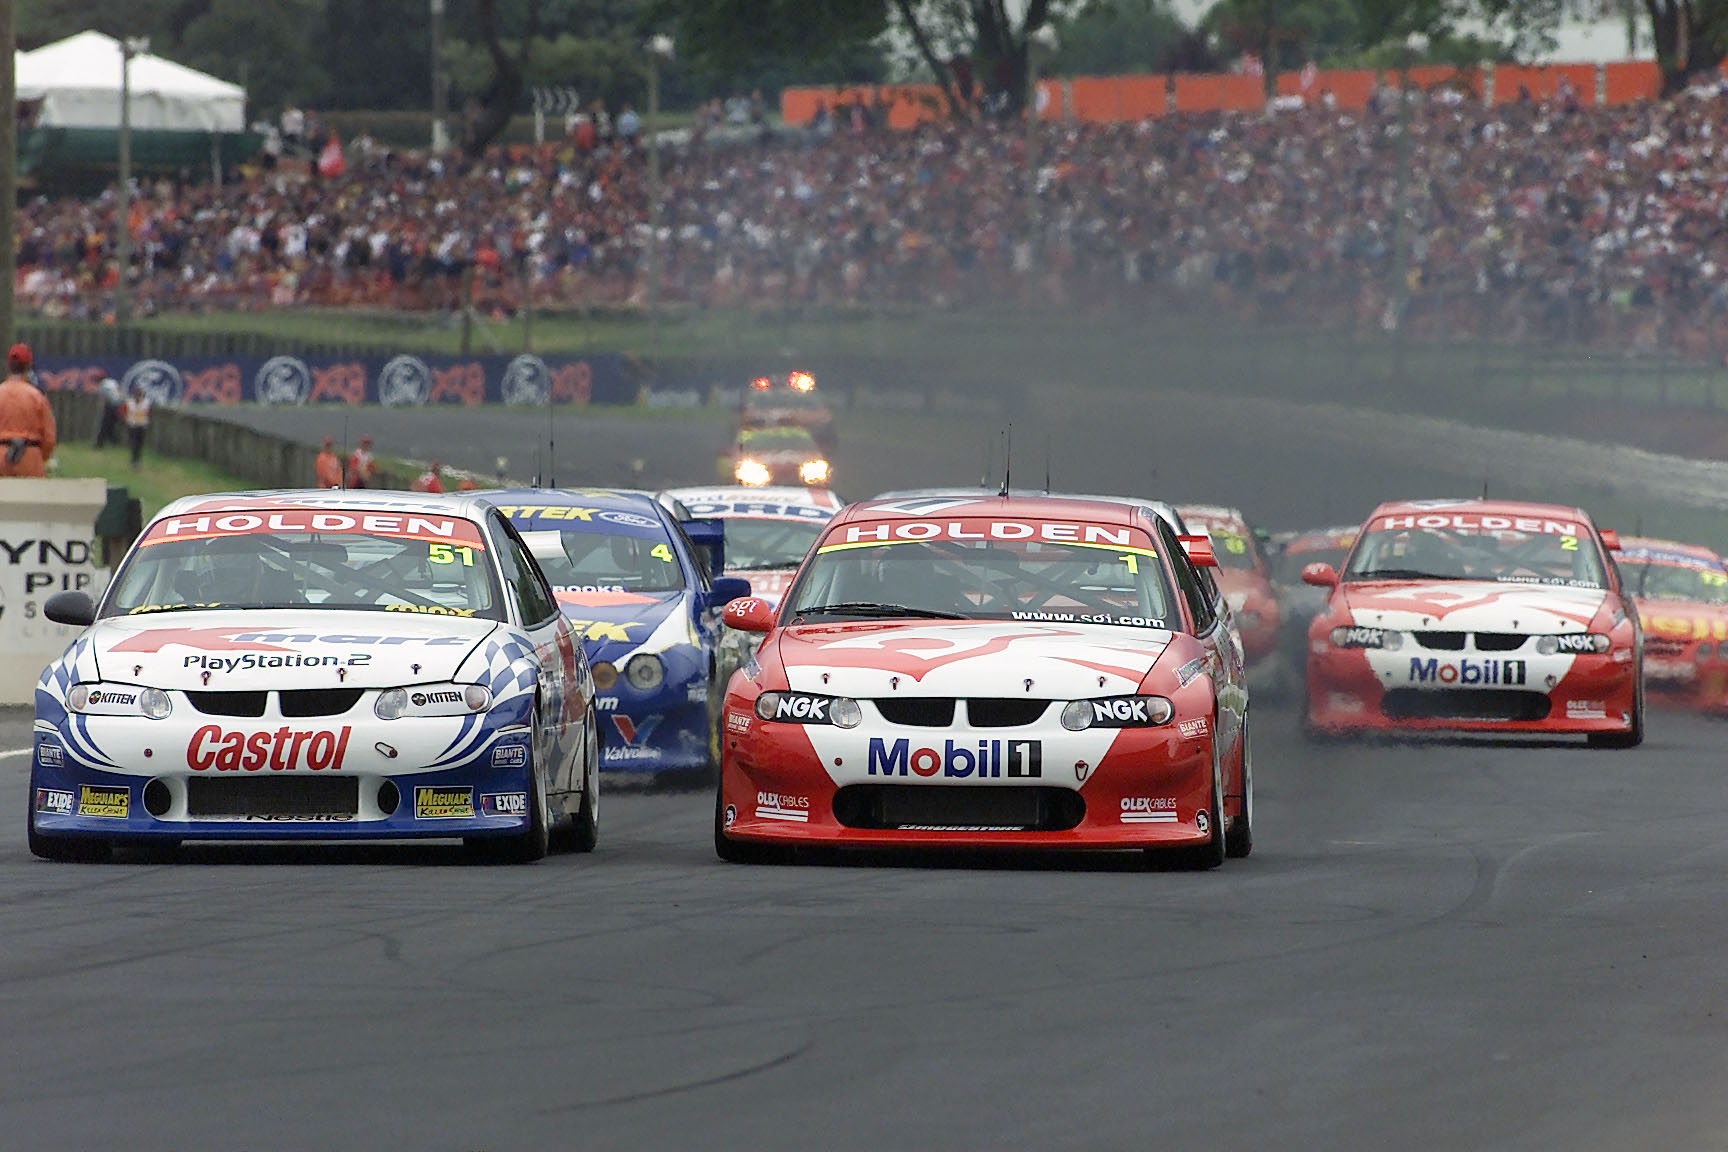 Greg Murphy (No.51) in his Holden Commodore VX races down the straight next to championship winner Mark Skaife (No.1) at Pukekohe Park.